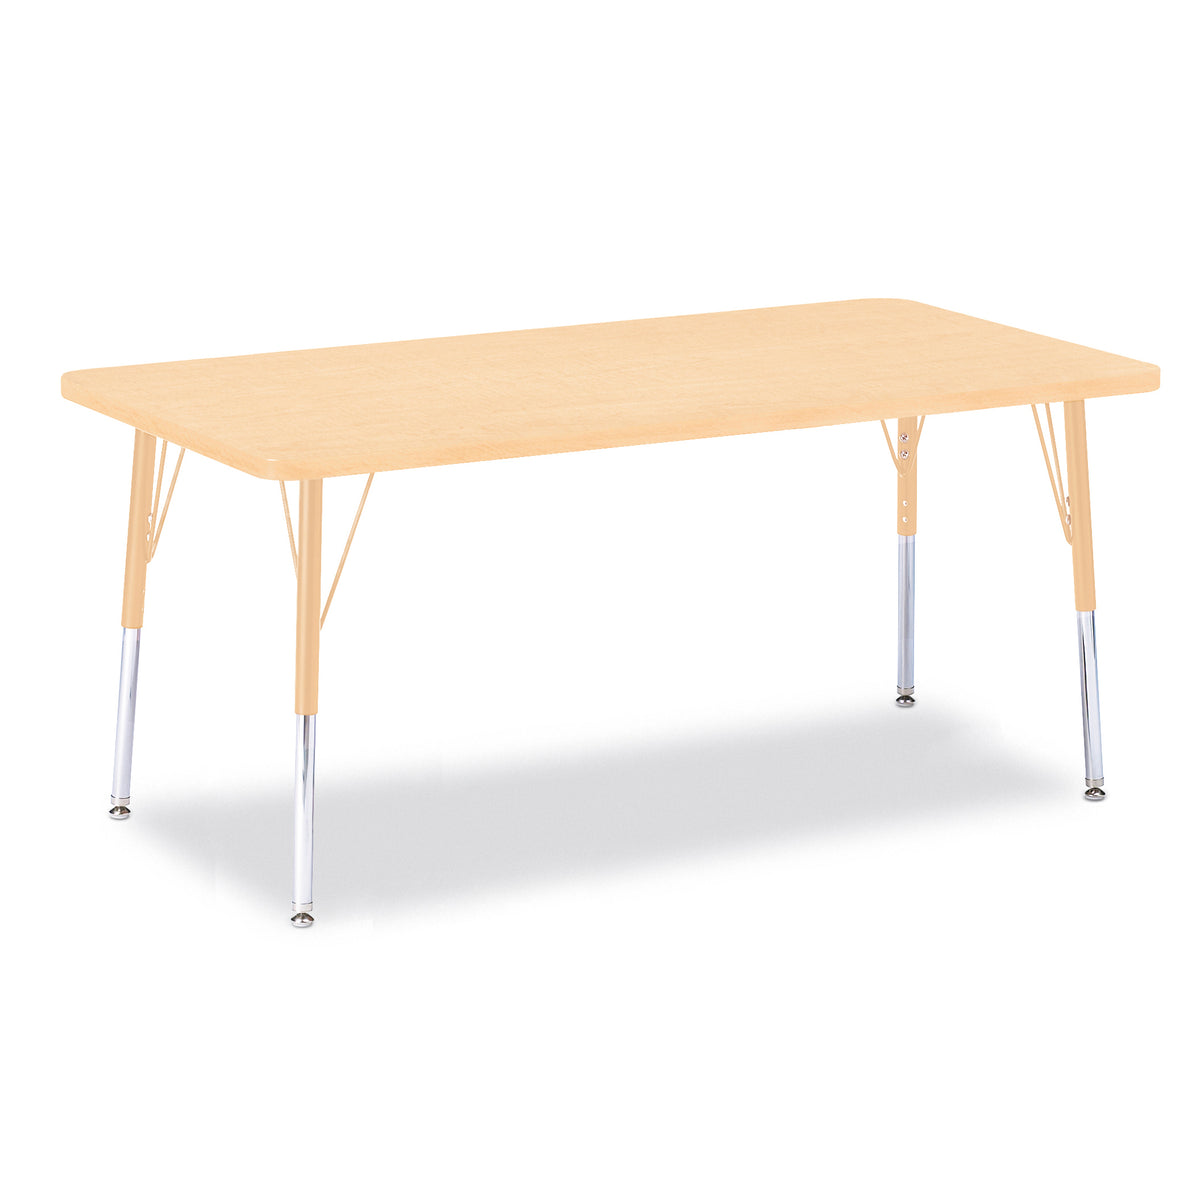 6408JCA251, Berries Rectangle Activity Table - 30" X 60", A-height - Maple/Maple/Camel